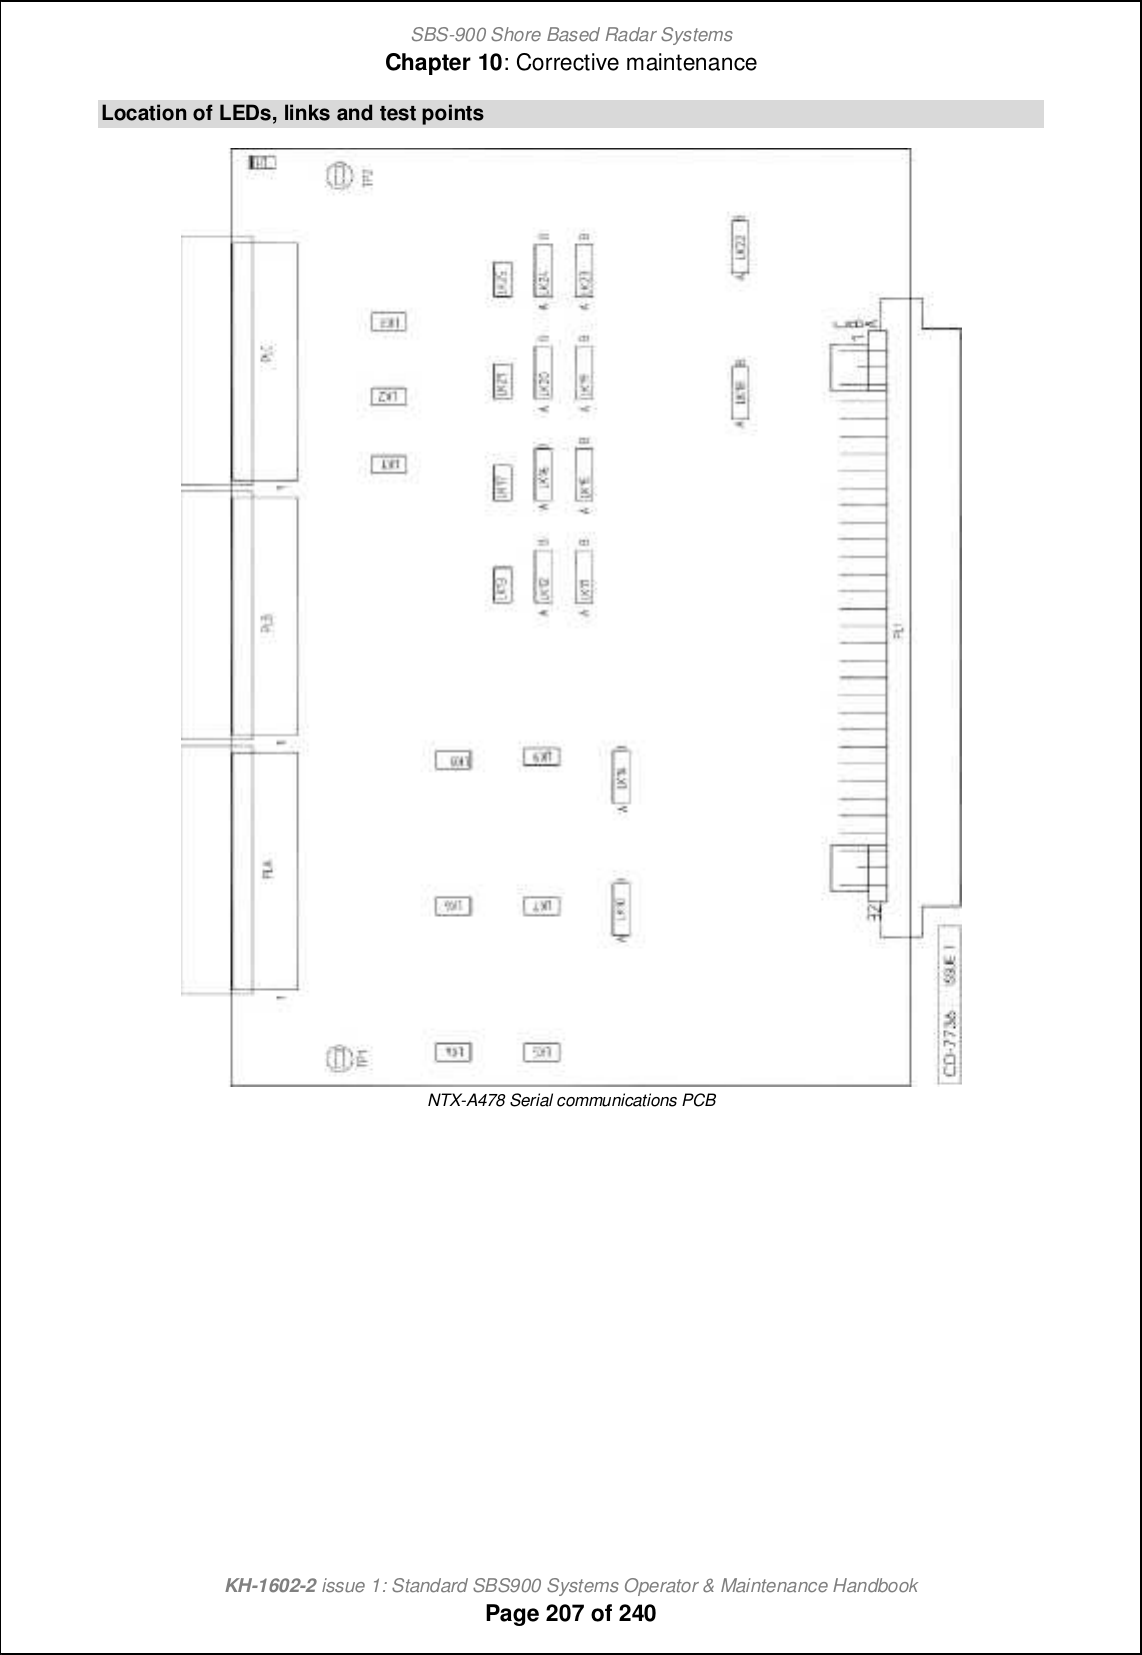 SBS-900 Shore Based Radar SystemsChapter 10: Corrective maintenanceKH-1602-2 issue 1: Standard SBS900 Systems Operator &amp; Maintenance HandbookPage 207 of 240Location of LEDs, links and test pointsNTX-A478 Serial communications PCB